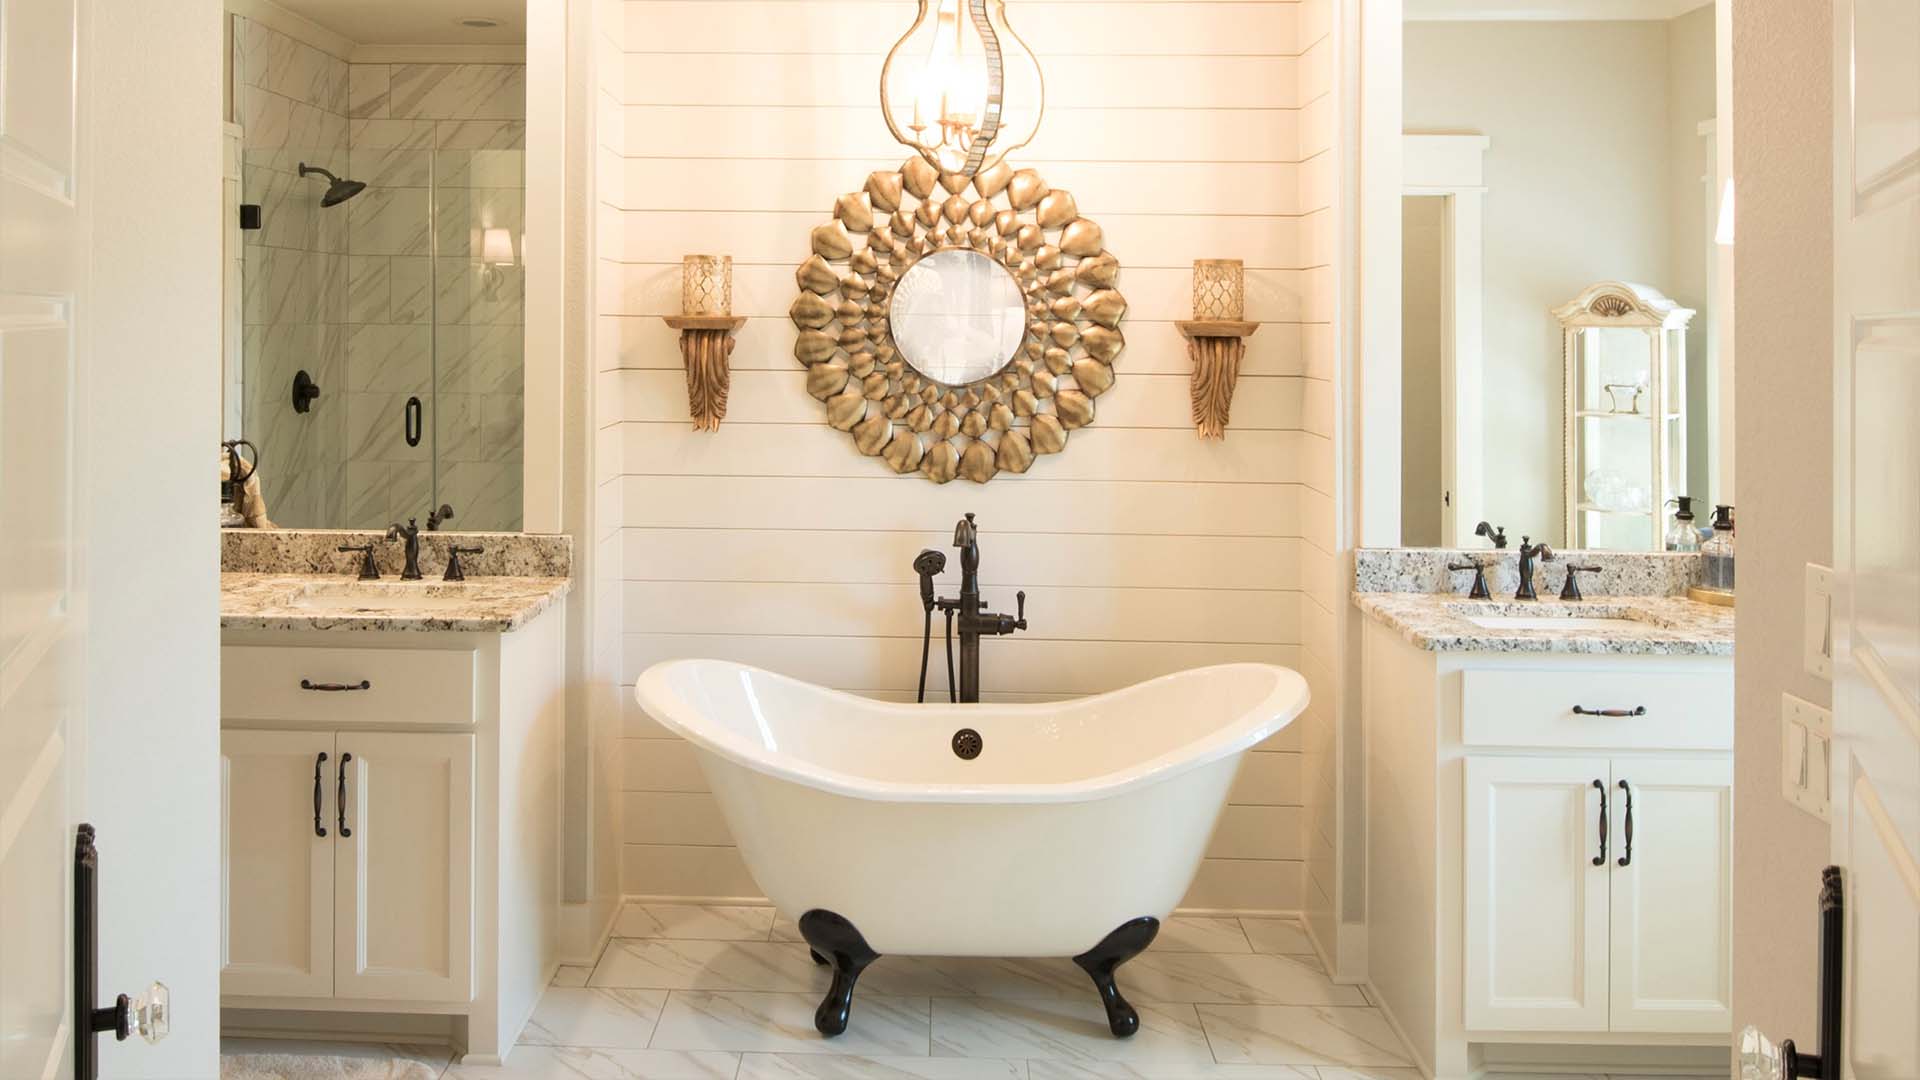 A beautiful bathroom with white and gold accents